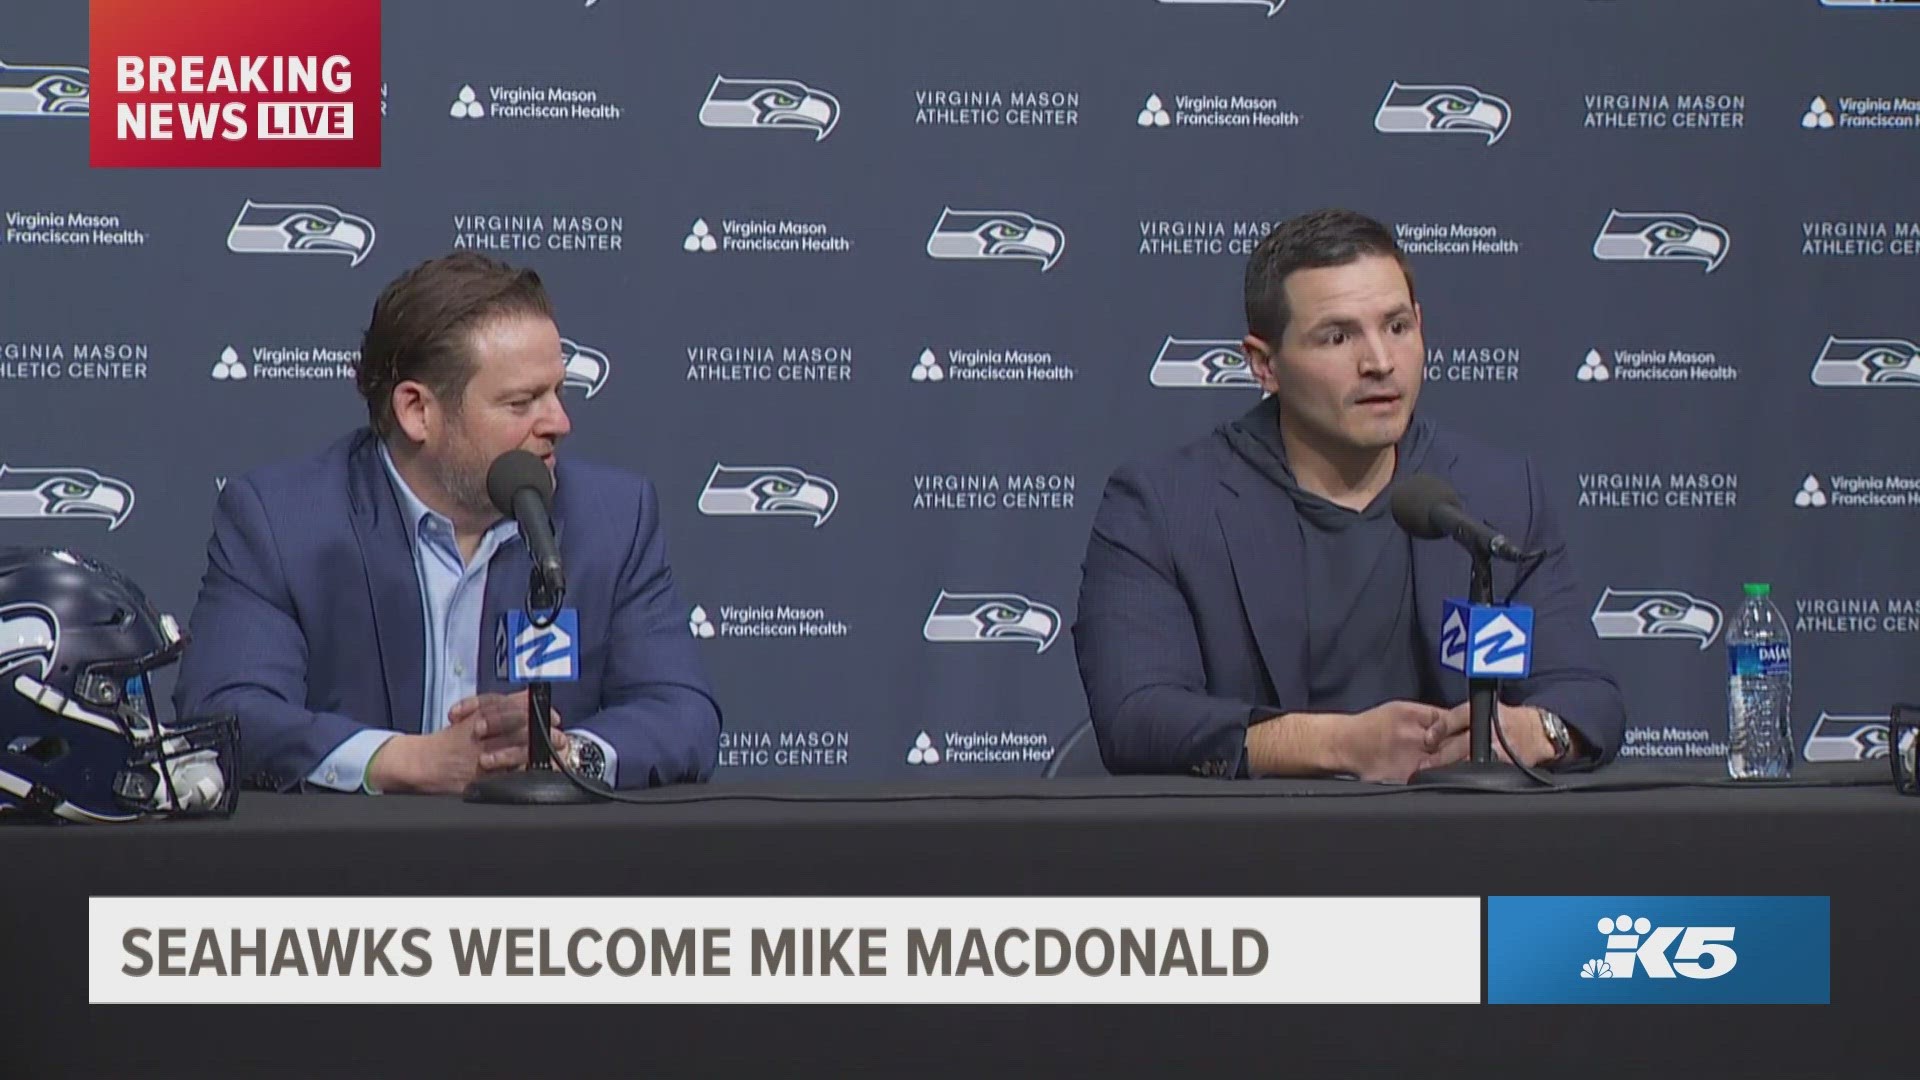 The Seattle Seahawks welcome the eight head coach in team history, Mike Macdonald